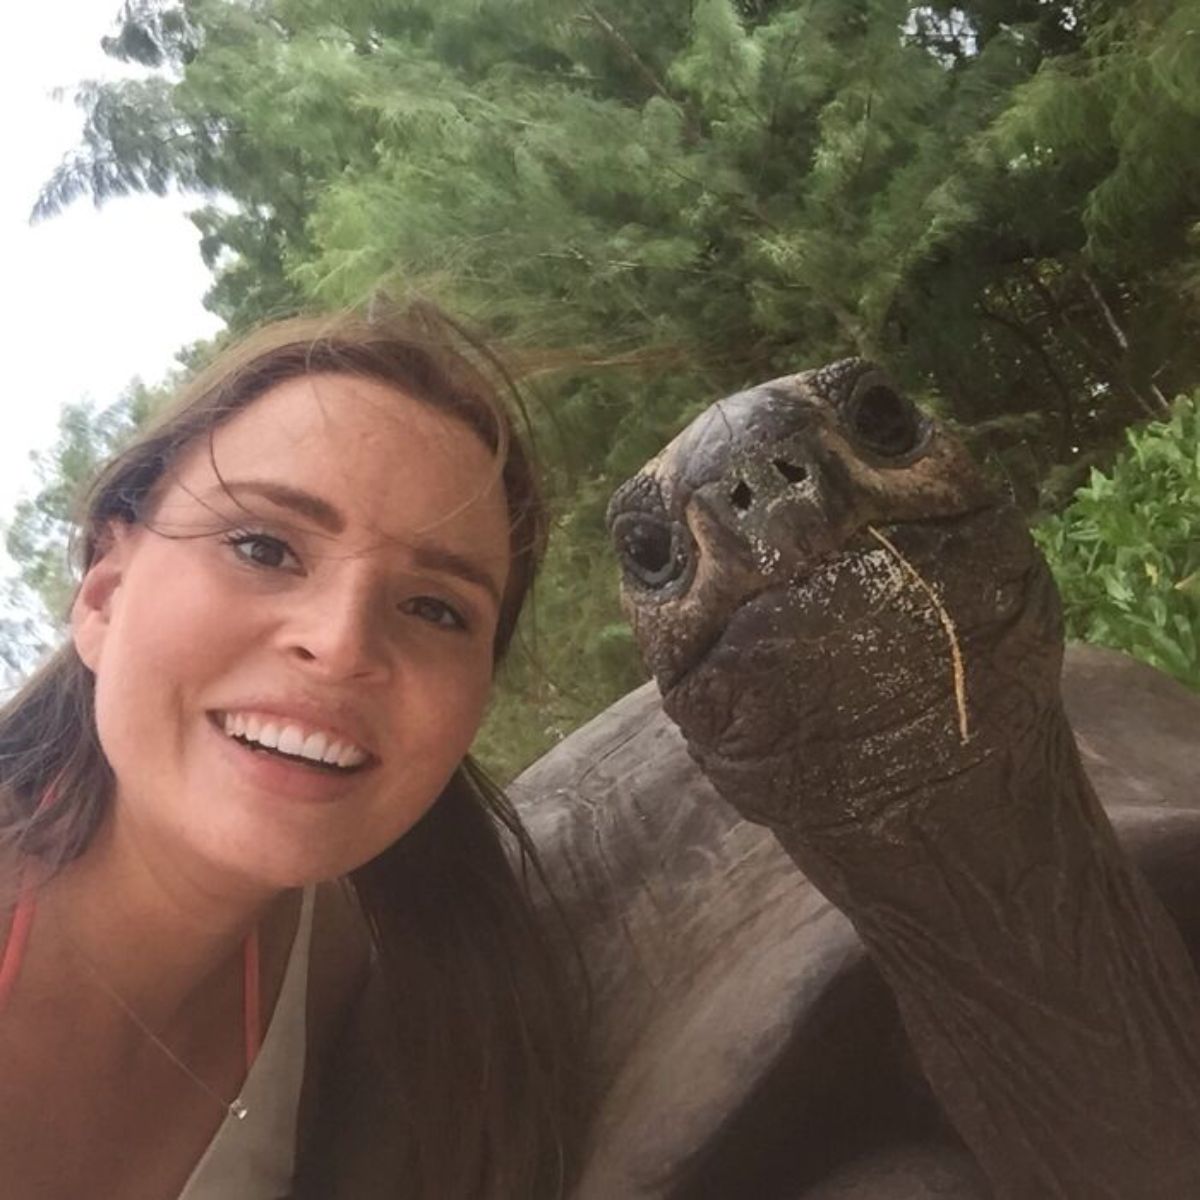 woman posing with a tortoise